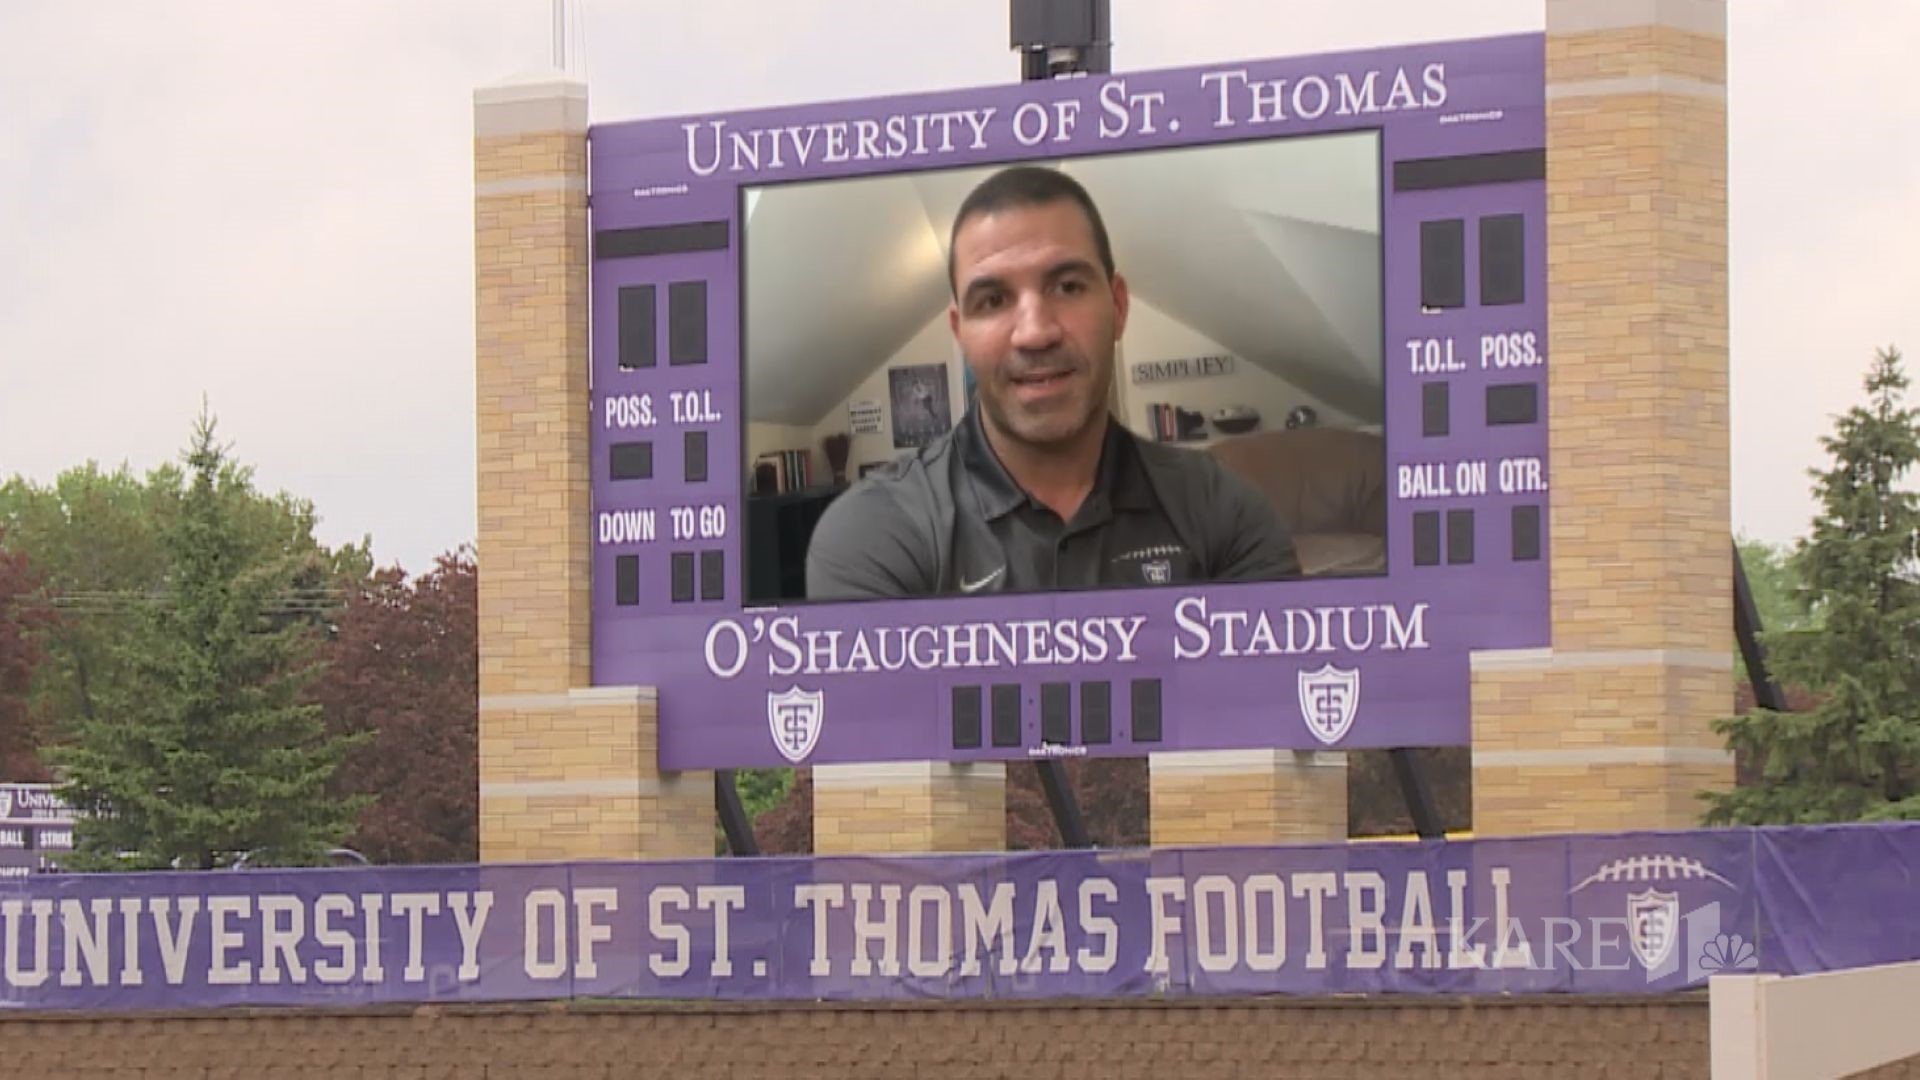 This past summer the NCAA gave St. Thomas permission to move up from Division III to Division I.